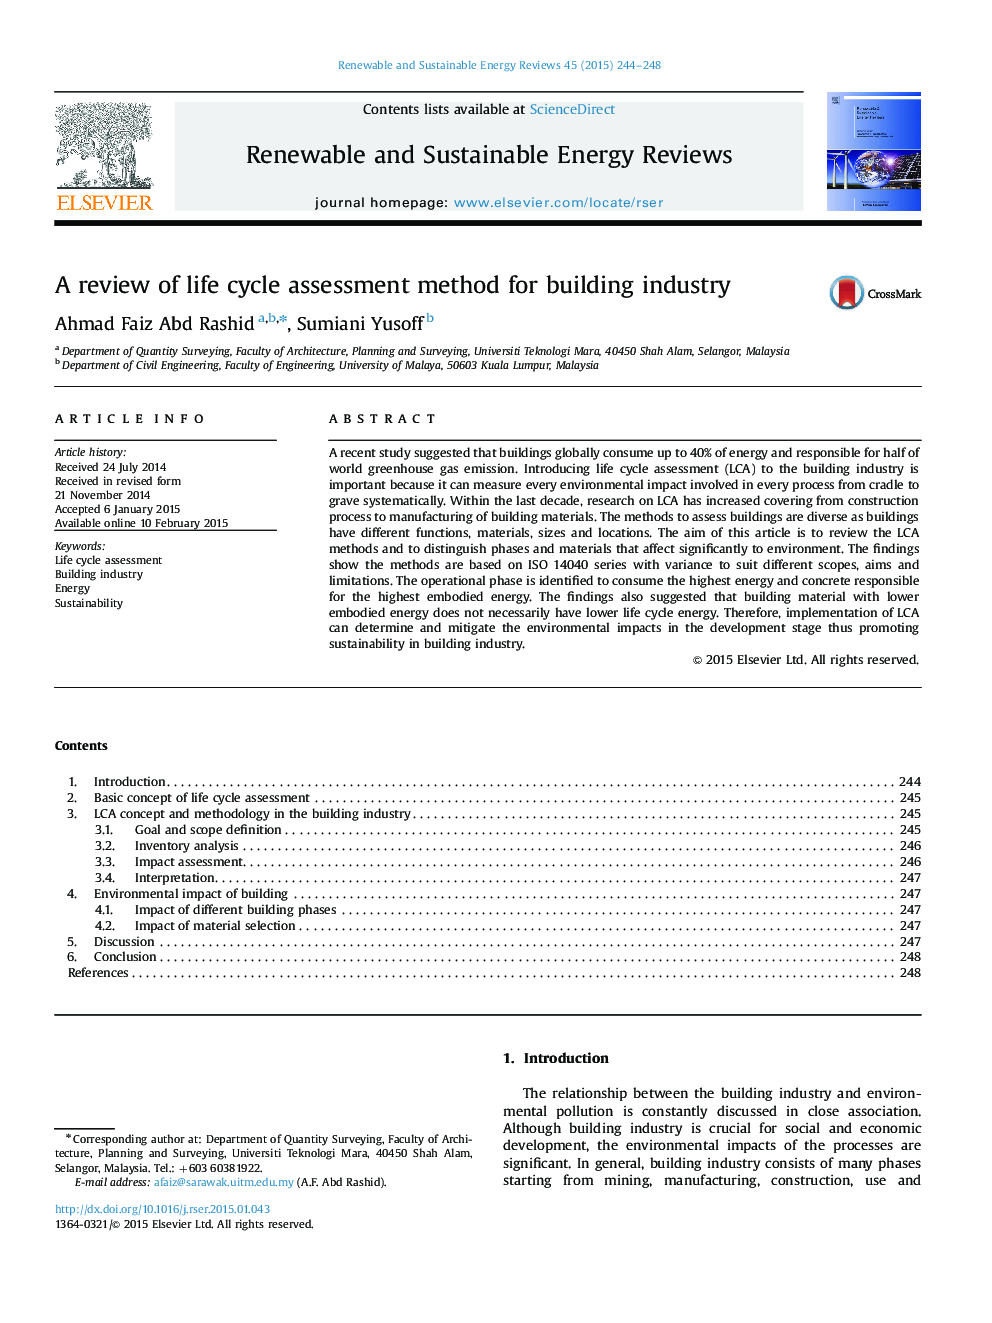 A review of life cycle assessment method for building industry